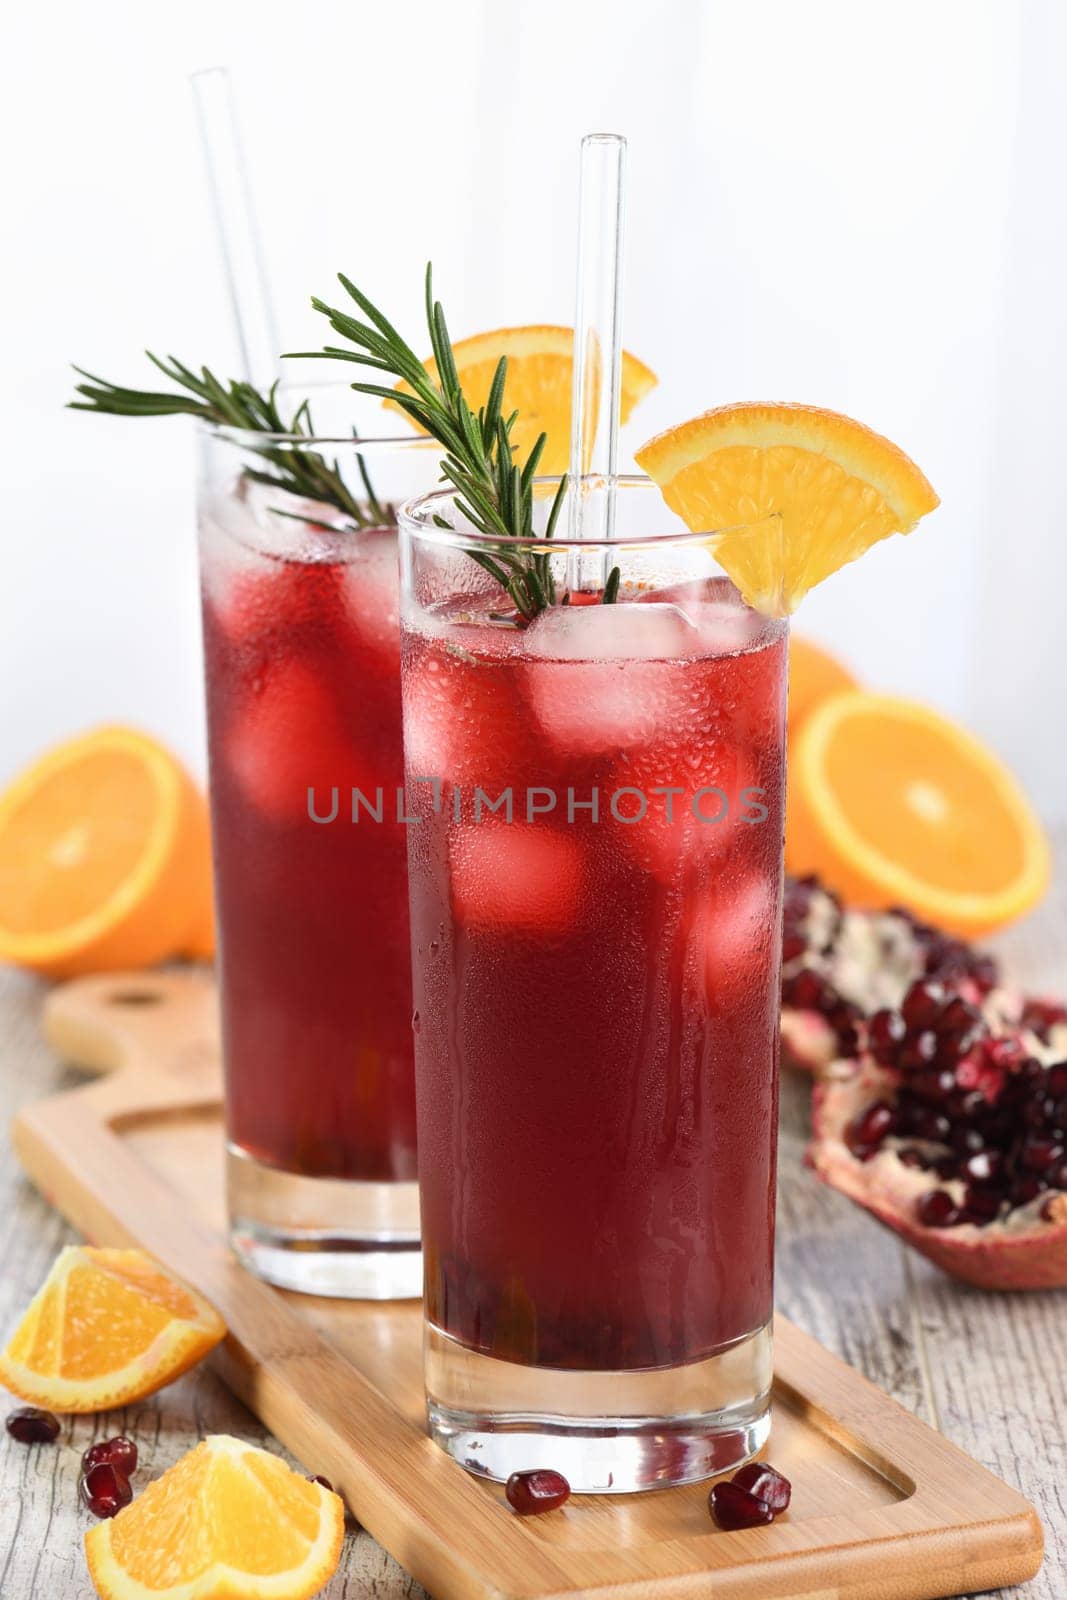 Pomegranate orange holiday punch with ice and rosemary. This is a sweet, tart and refreshing cocktail perfect for celebrating any party.